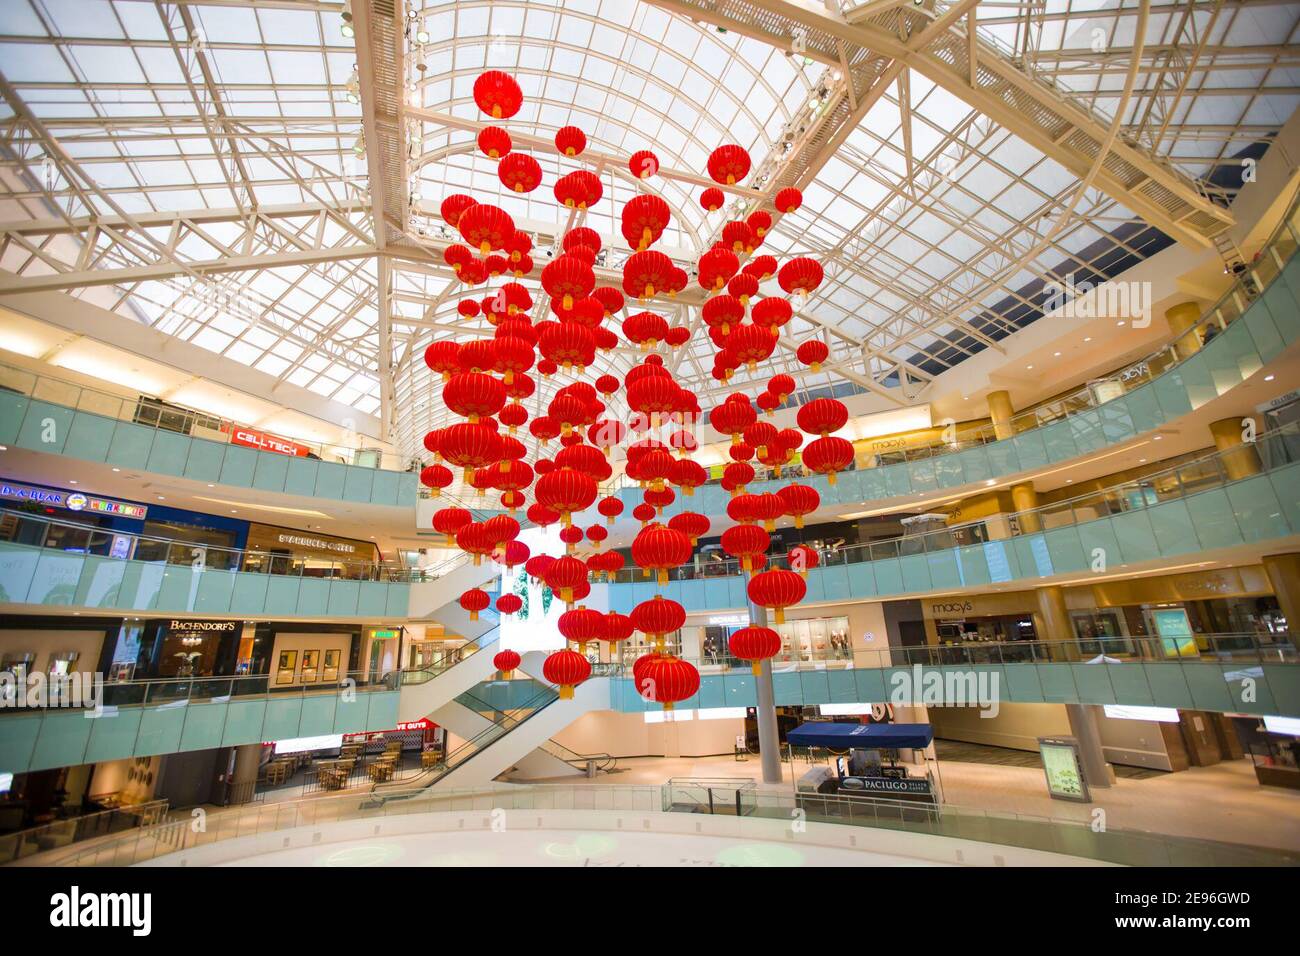 Dallas, USA. 2nd Feb, 2021. Red lanterns are seen in Galleria Dallas  shopping mall in Dallas, Texas, the United States, on Feb. 2, 2021. Over  200 red lanterns, as decorations for the